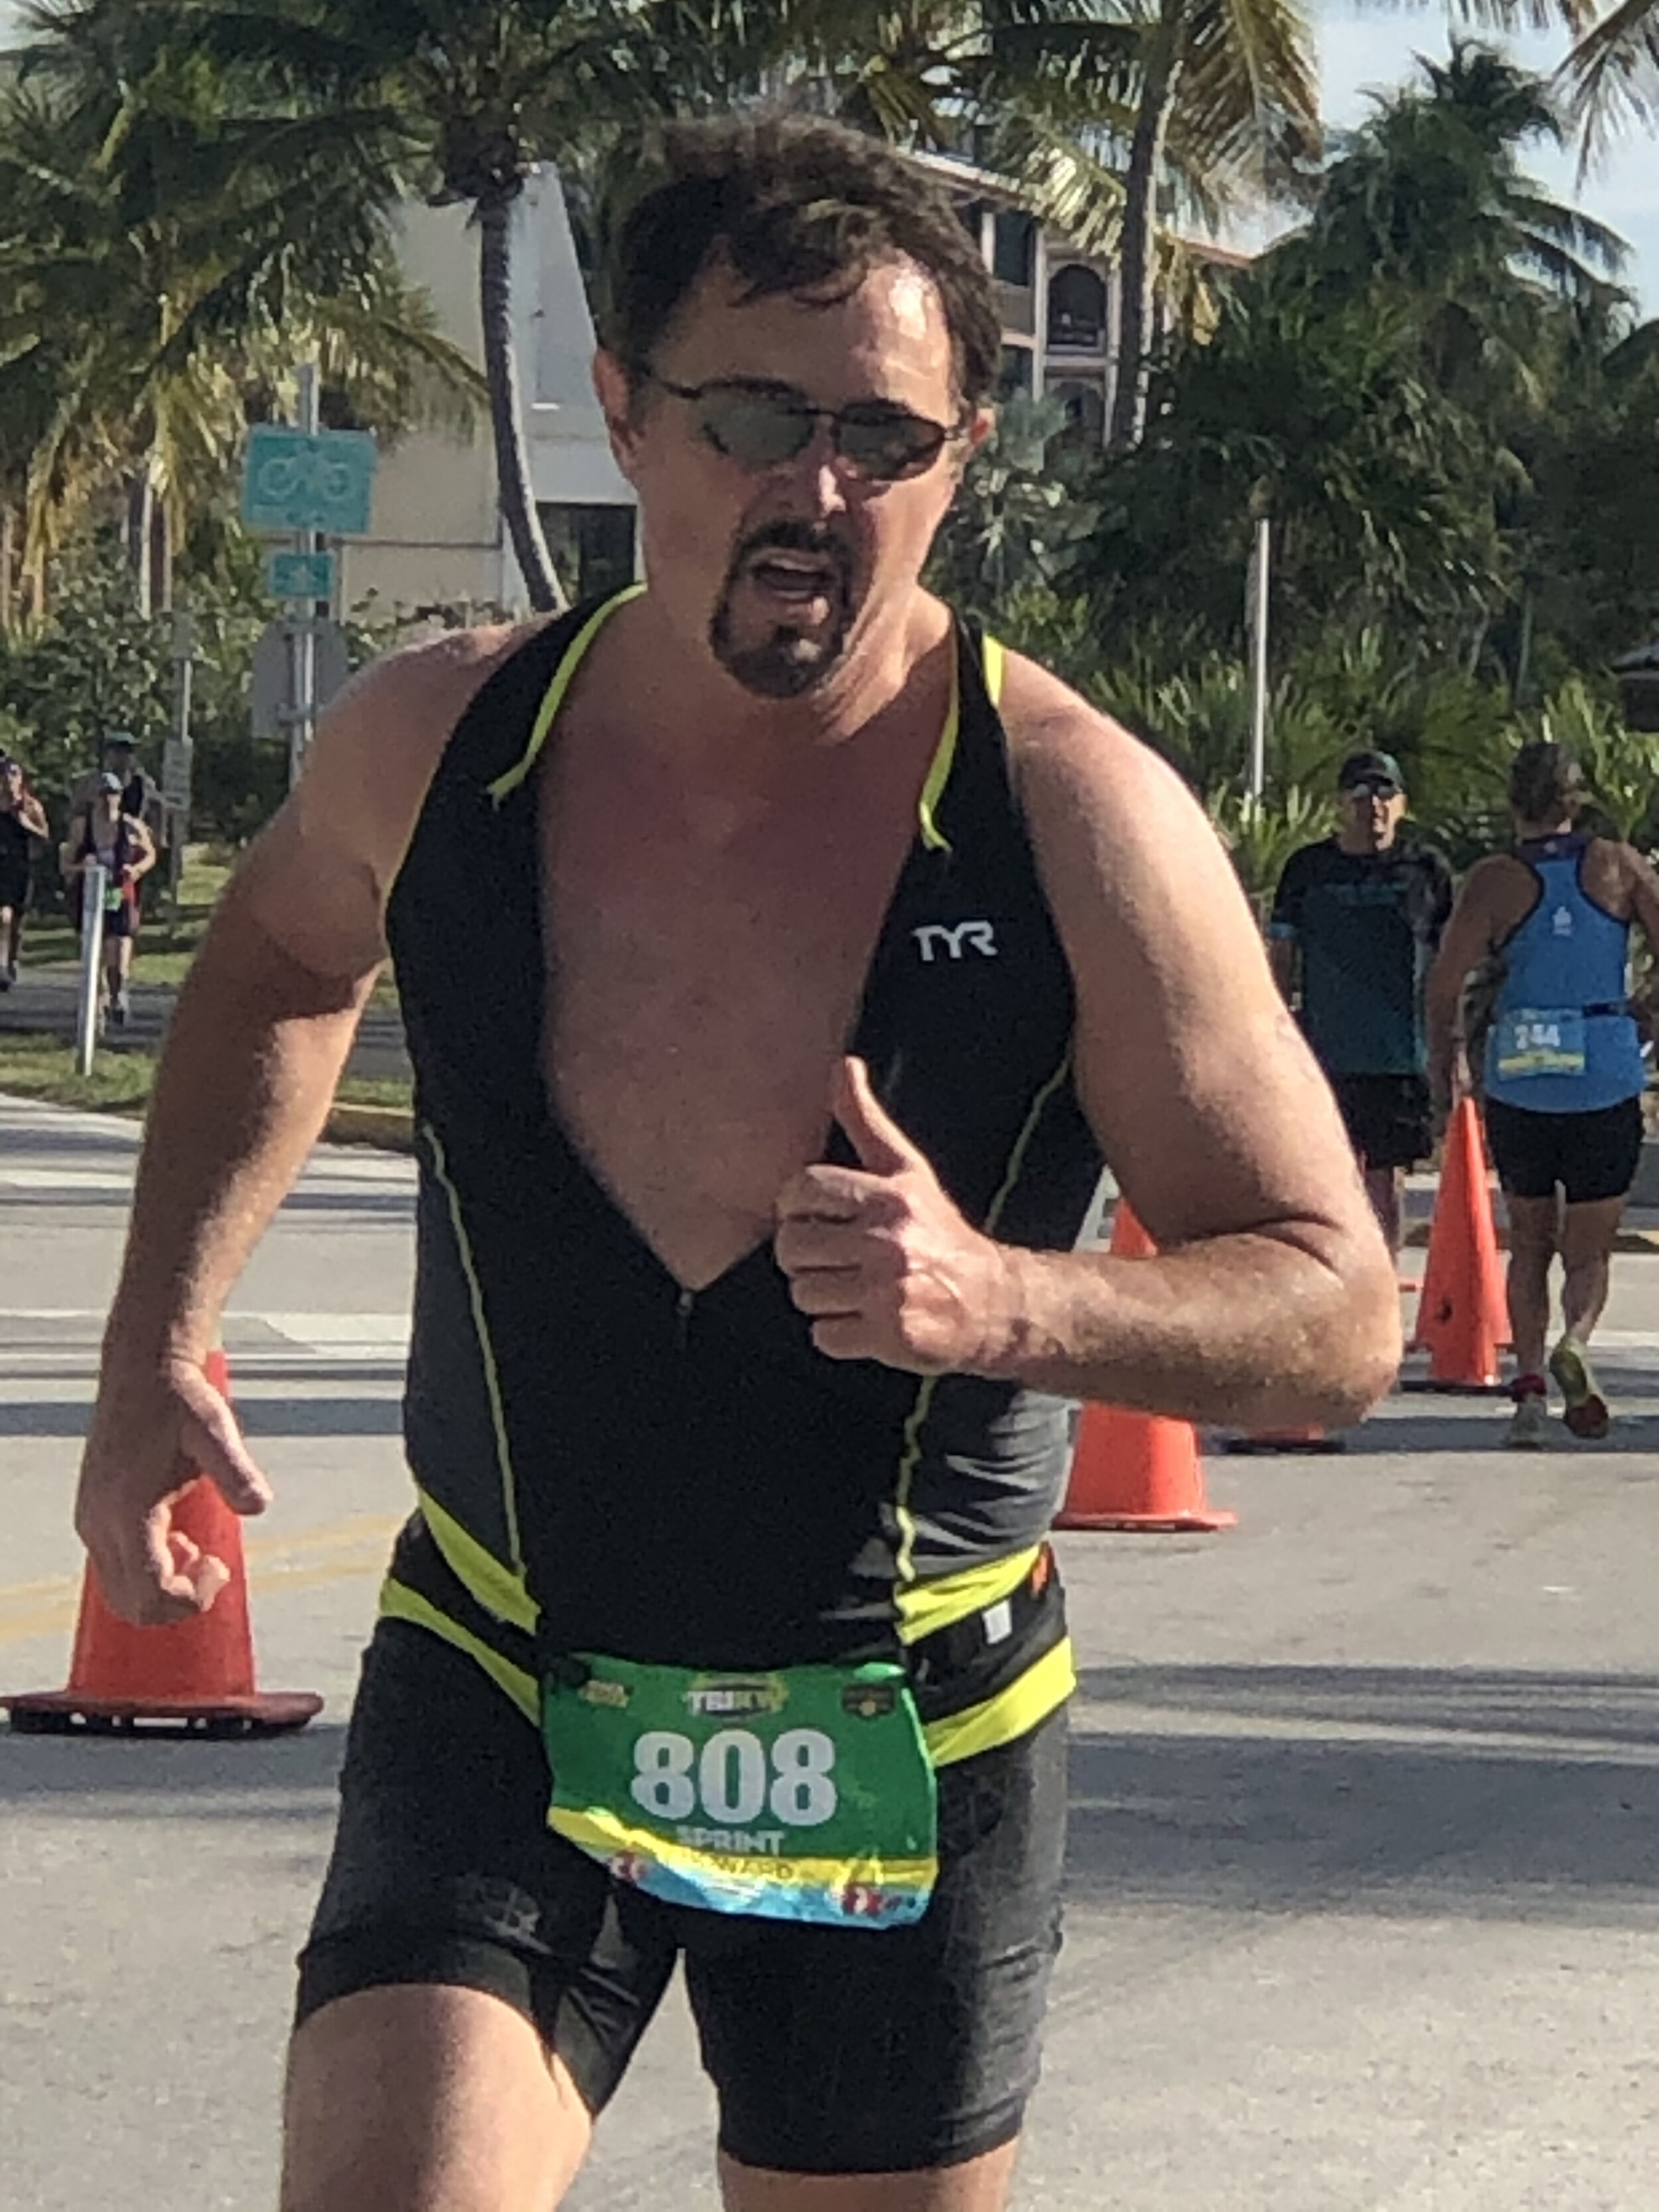 Howard approaching the finish line